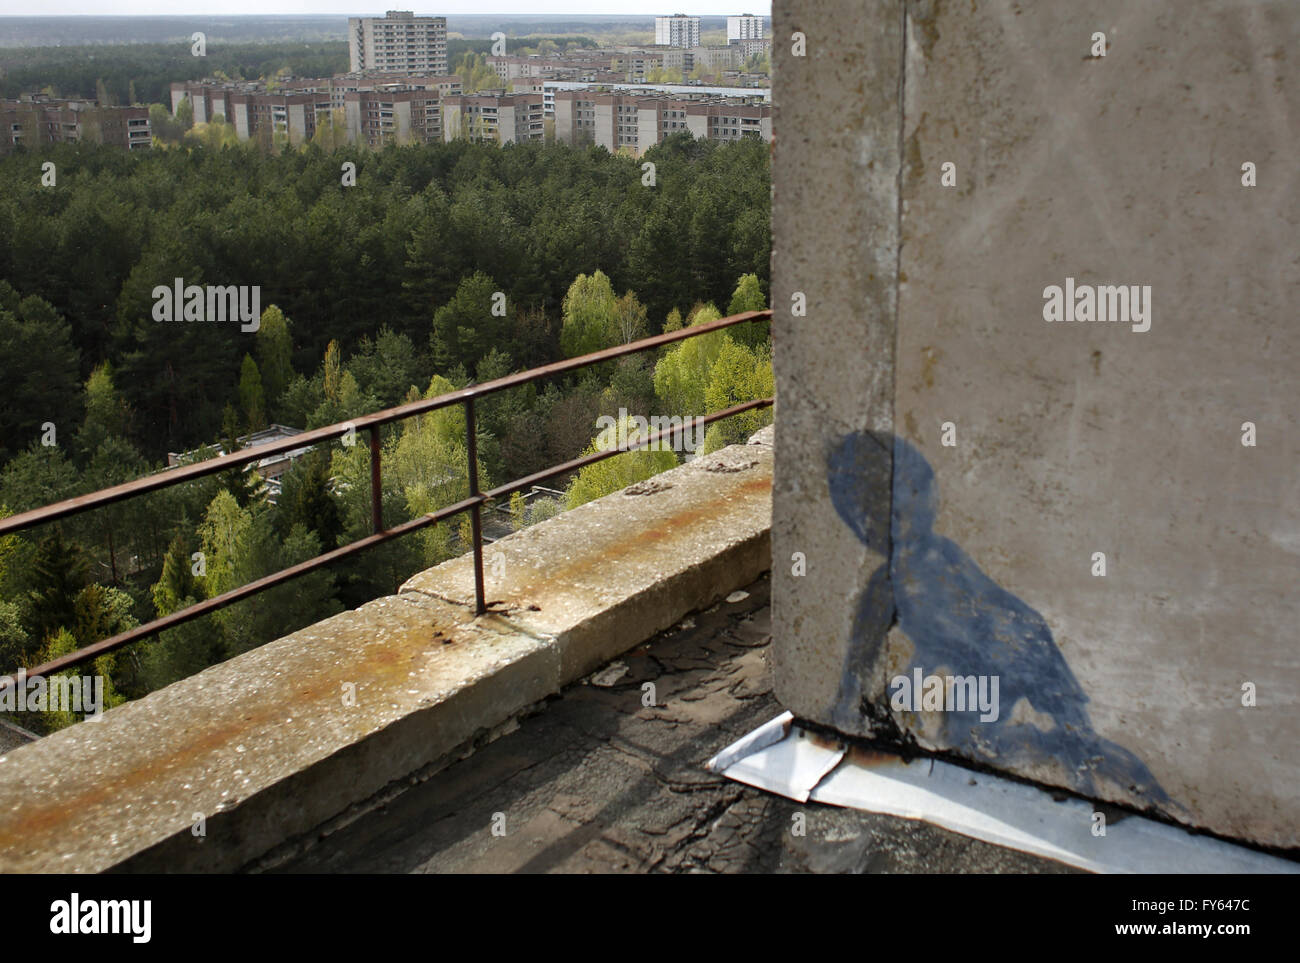 A picture taken on April 22, 2016 shows the graffiti on the wall of the abandoned house in the ghost town Prypyat where workers of the Chornobyl nuclear plant lived. Following the explosion at the fourth power unit Chornobyl Nuclear Power Station in 1986 people had to leave their homes so to never return back. Evacuation of the population lasted 3 hours on April 27th, 1986. The city remains a ghost town near the Chernobyl Nuclear Power Plant and is still empty. 22nd Apr, 2016. Credit:  Anatolii Stepanov/ZUMA Wire/Alamy Live News Stock Photo